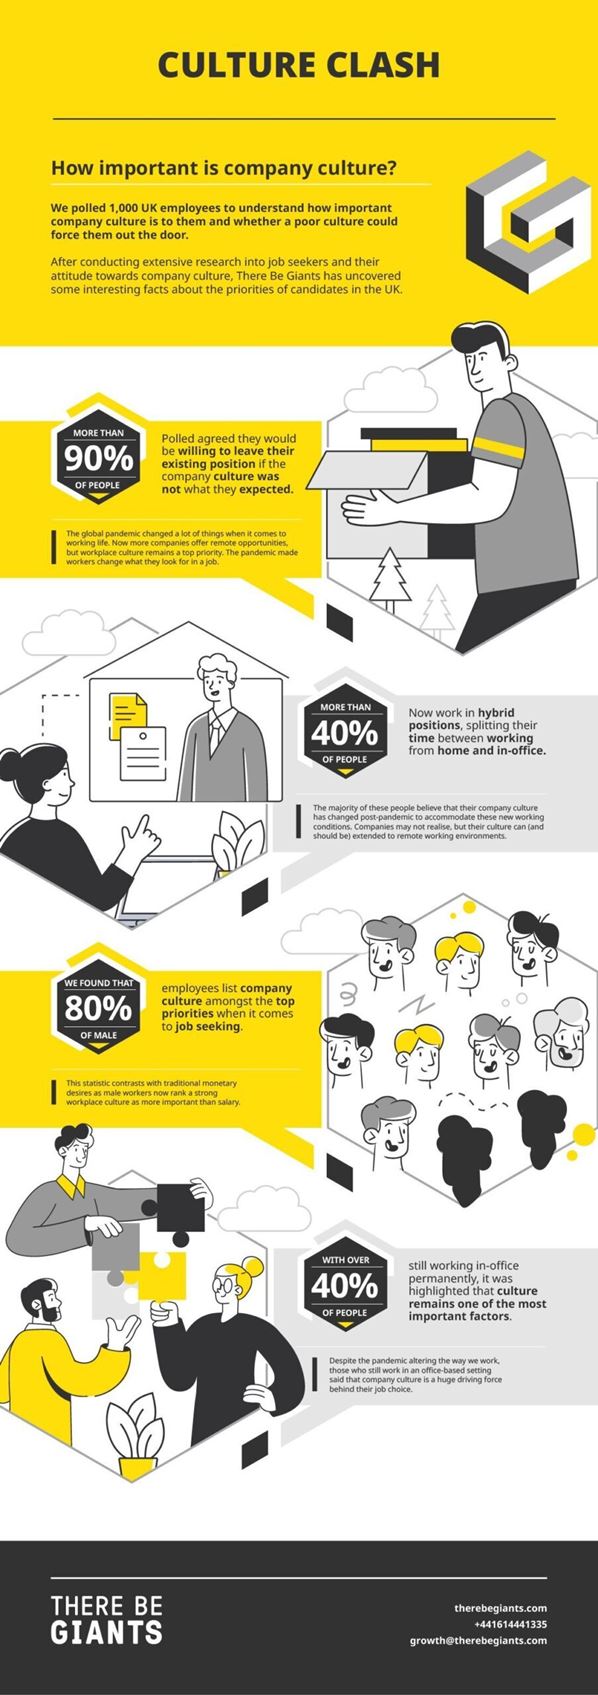 Company culture infographic